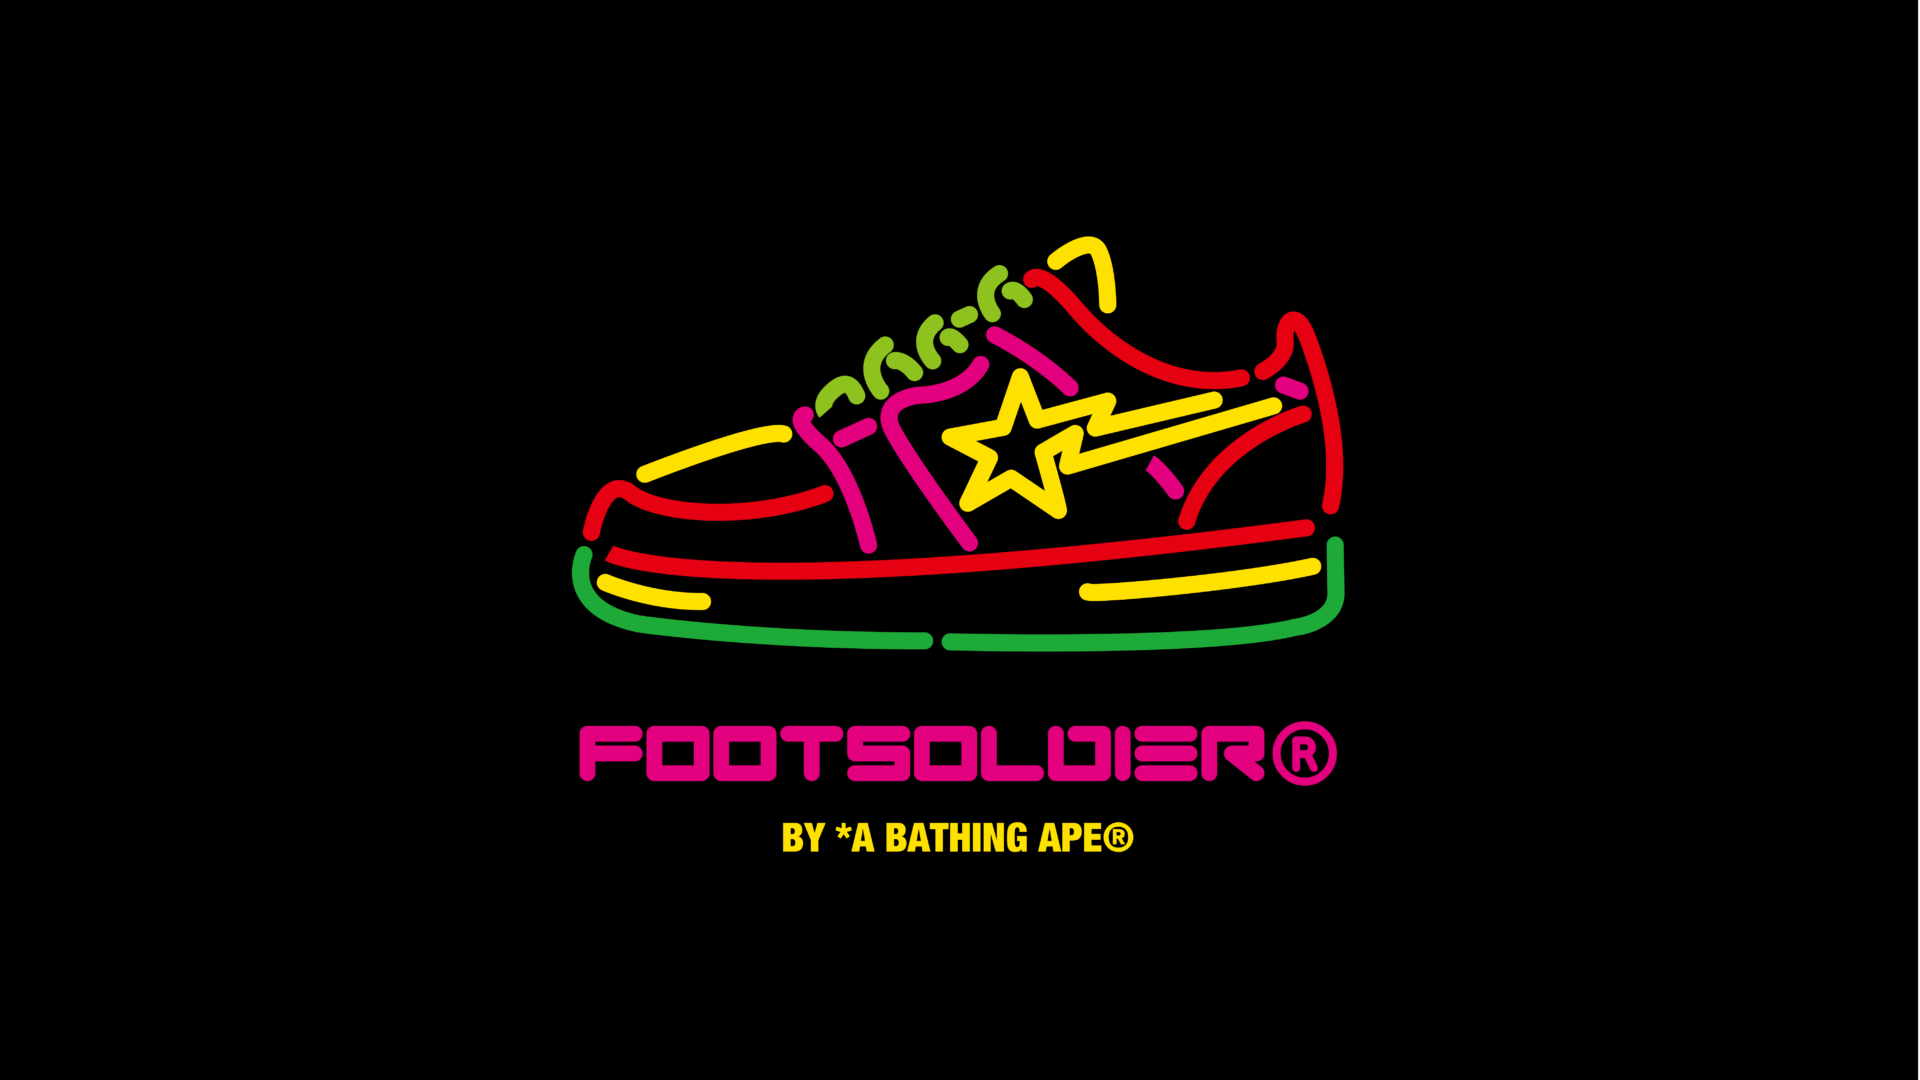 A BATHING APE ”Foot Soldier”